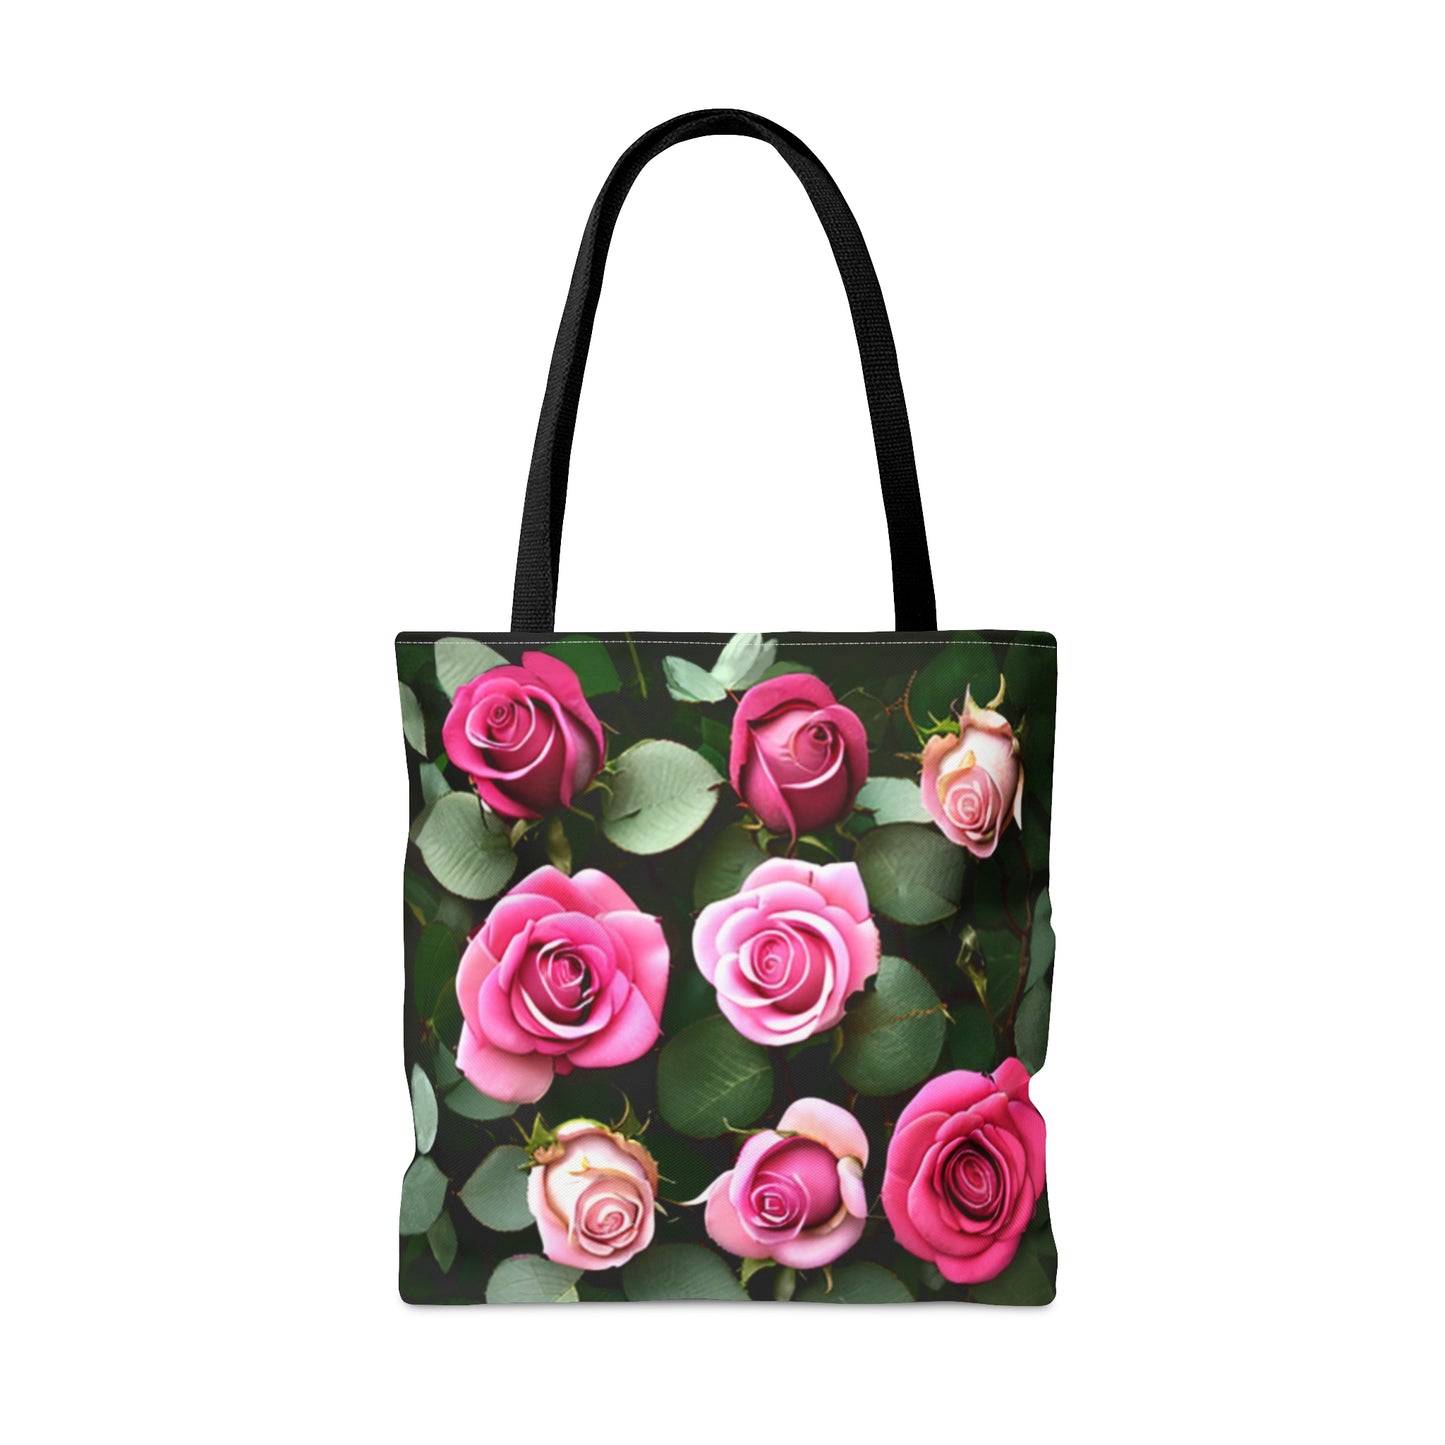 Lovely Pink Roses Tote Bag